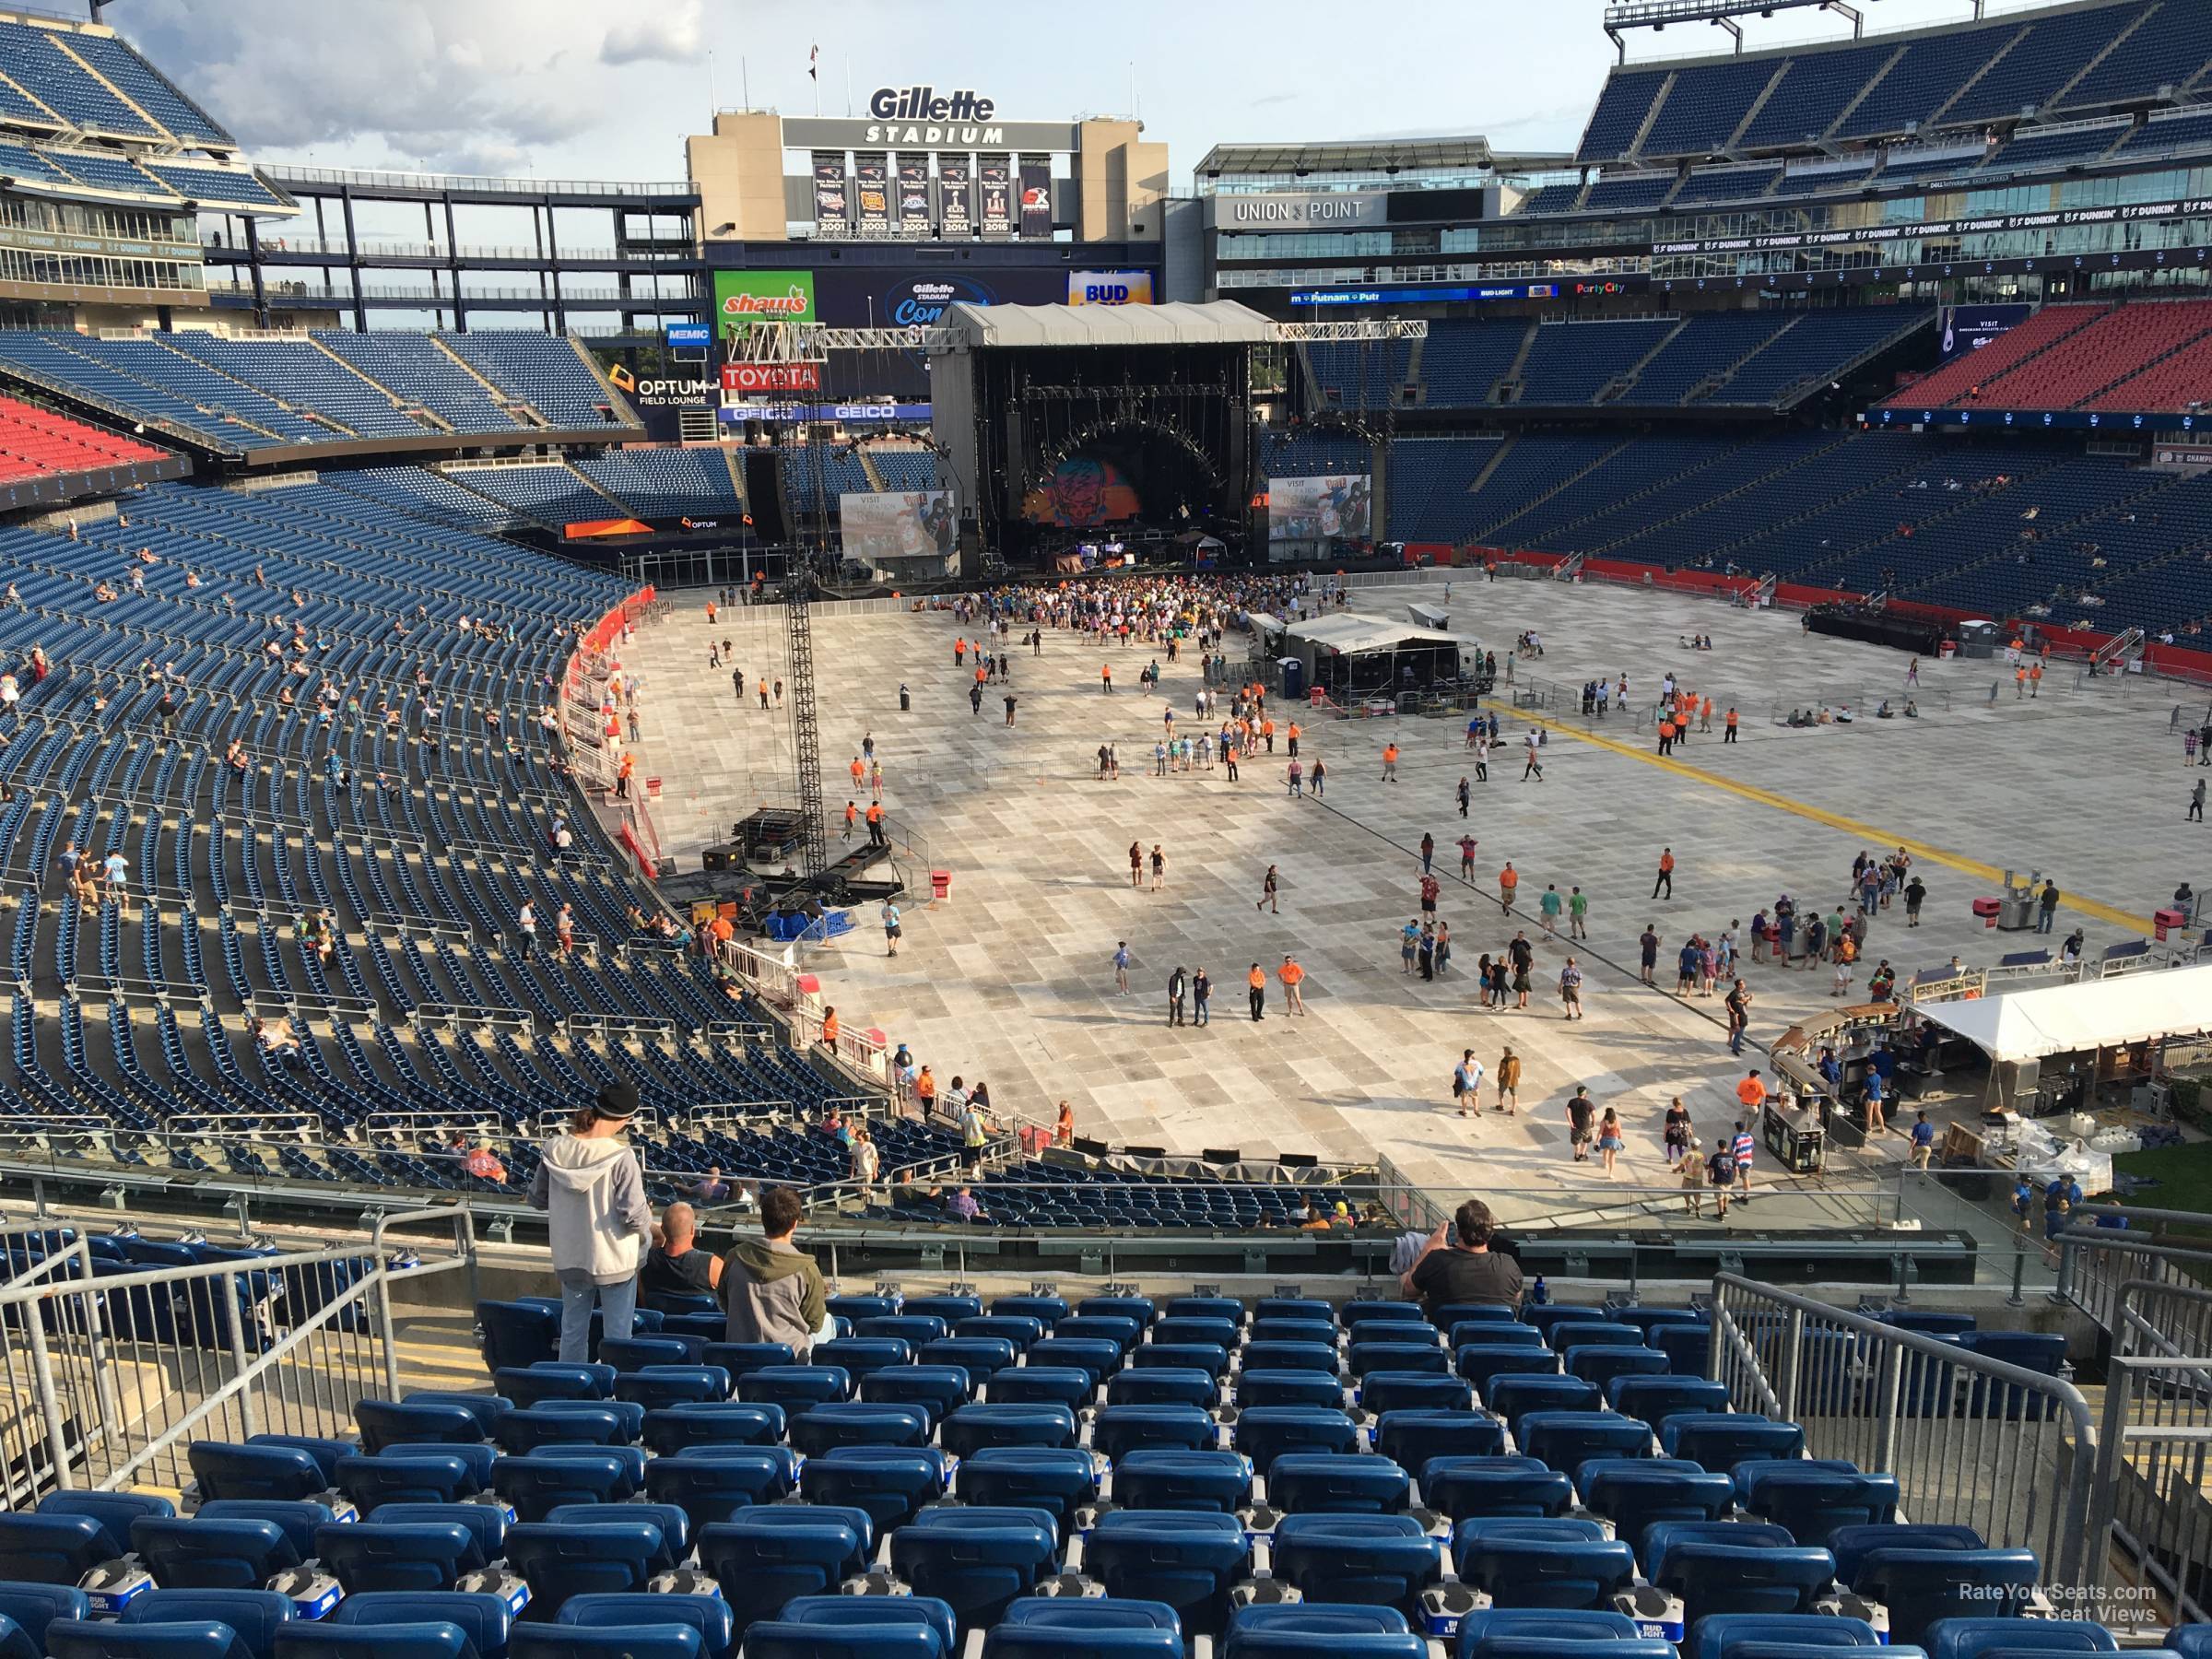 Gillette Stadium Section 201 Concert Seating - RateYourSeats.com